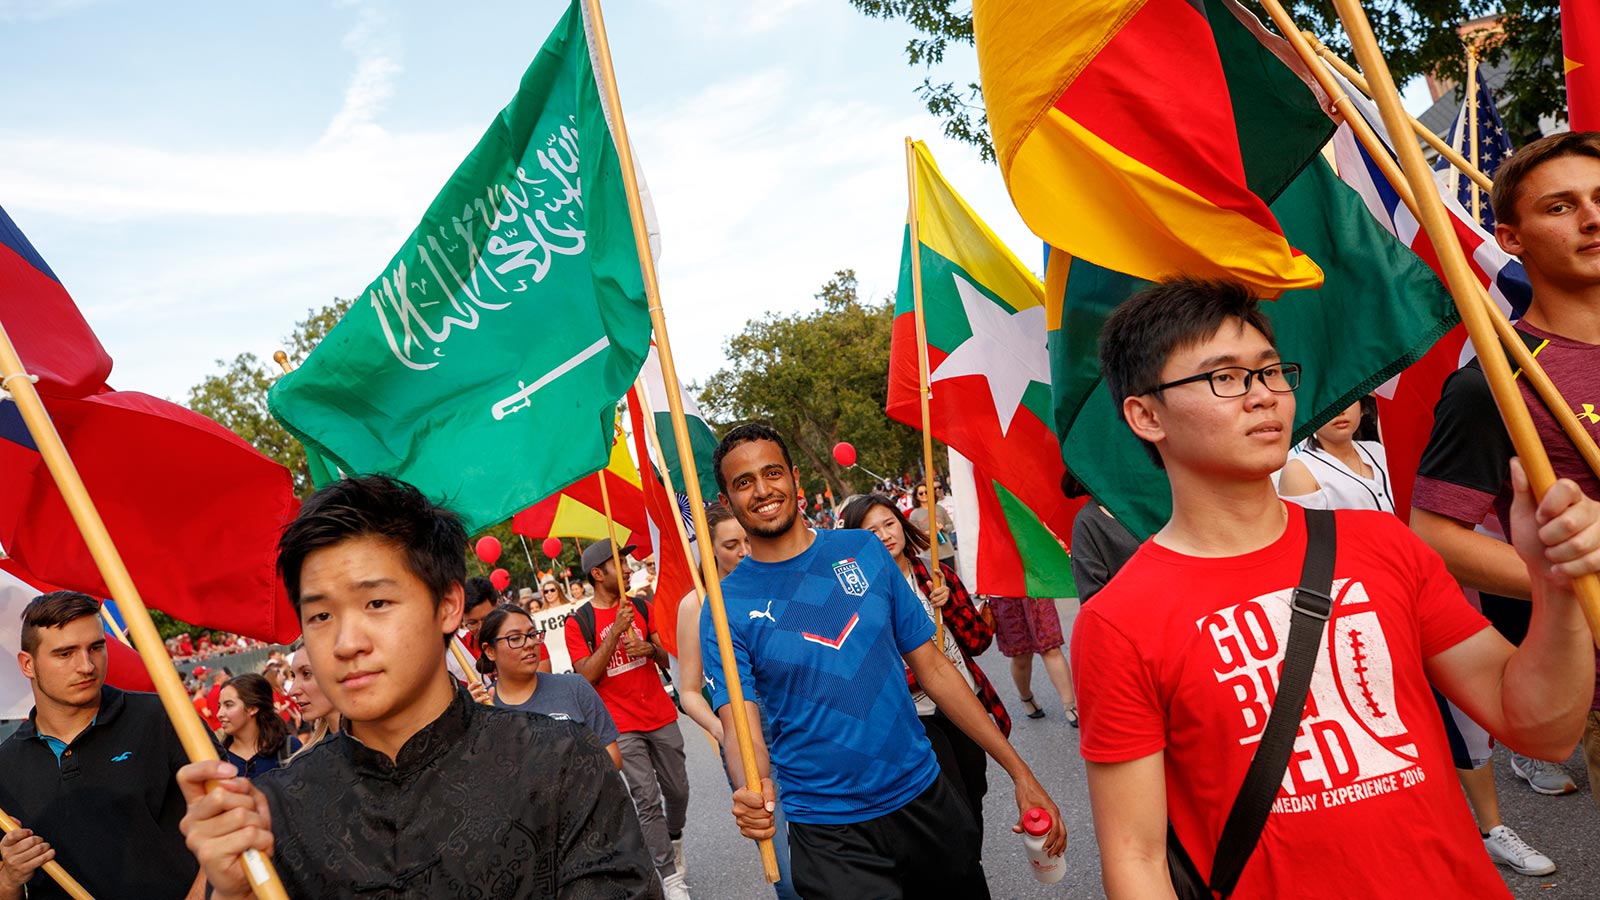 international students in homecoming parade holding country flags